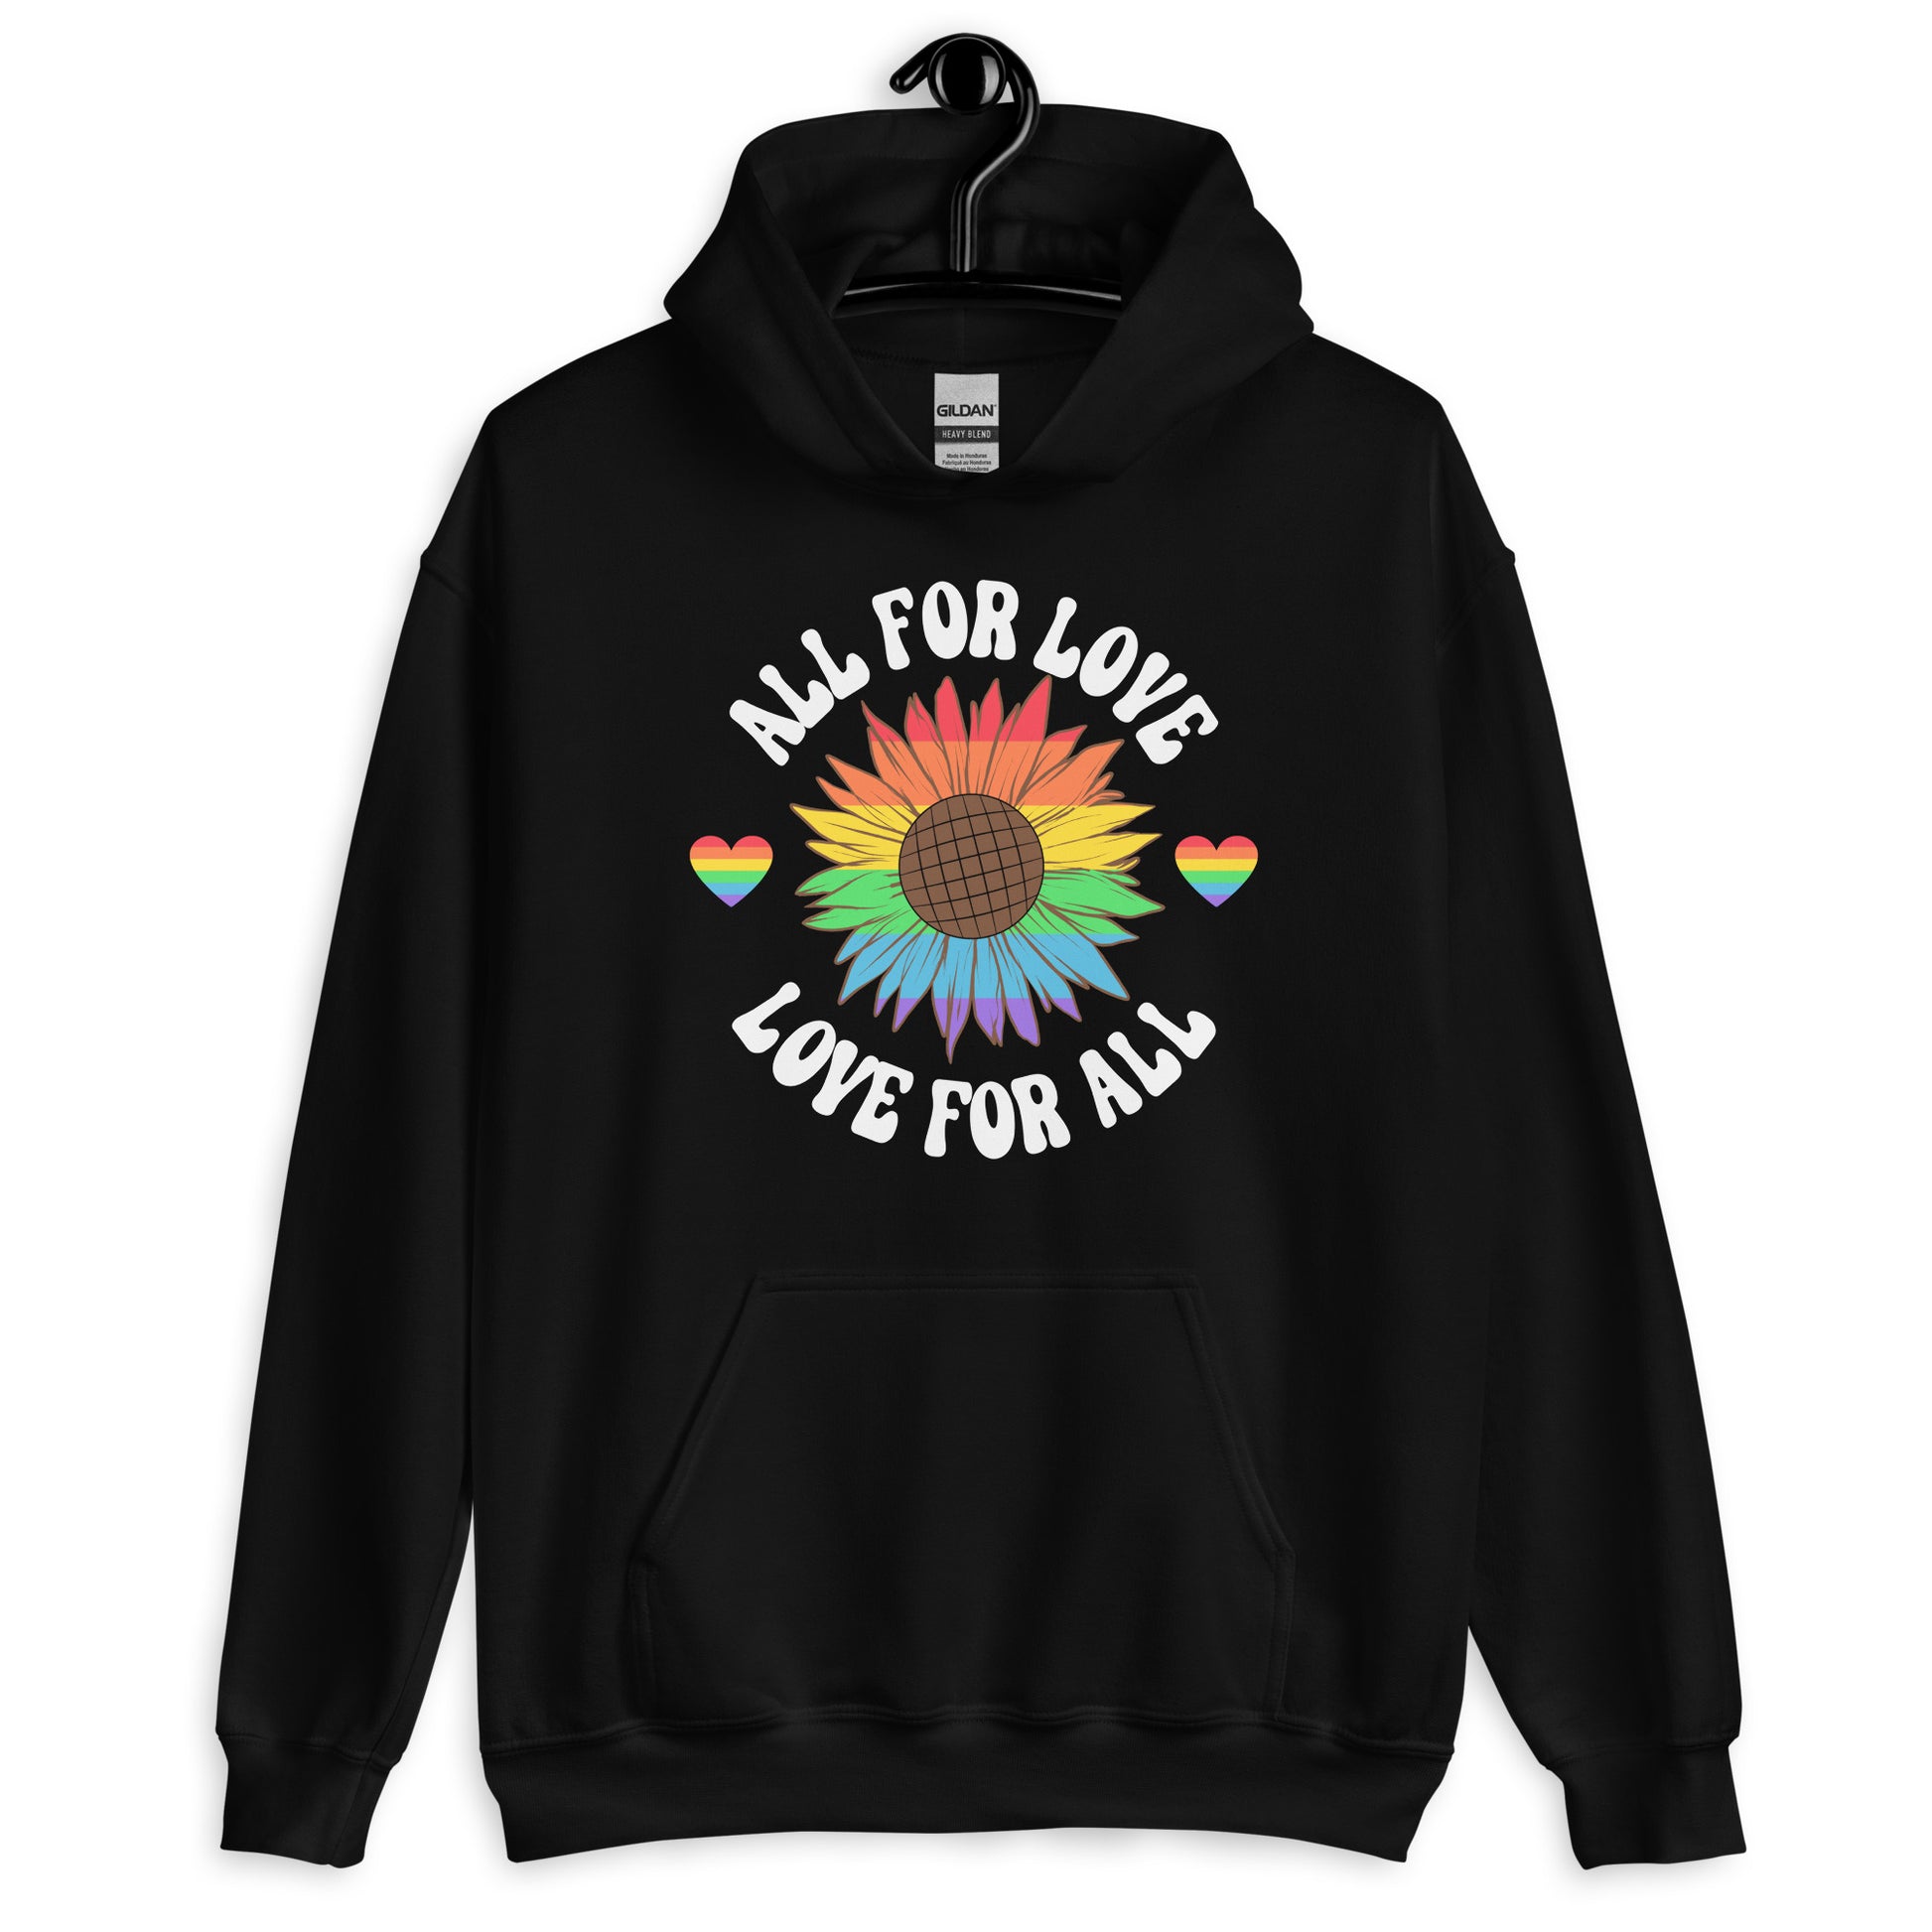 All For Love Love For All Gay Pride Hoodie - gay pride apparel